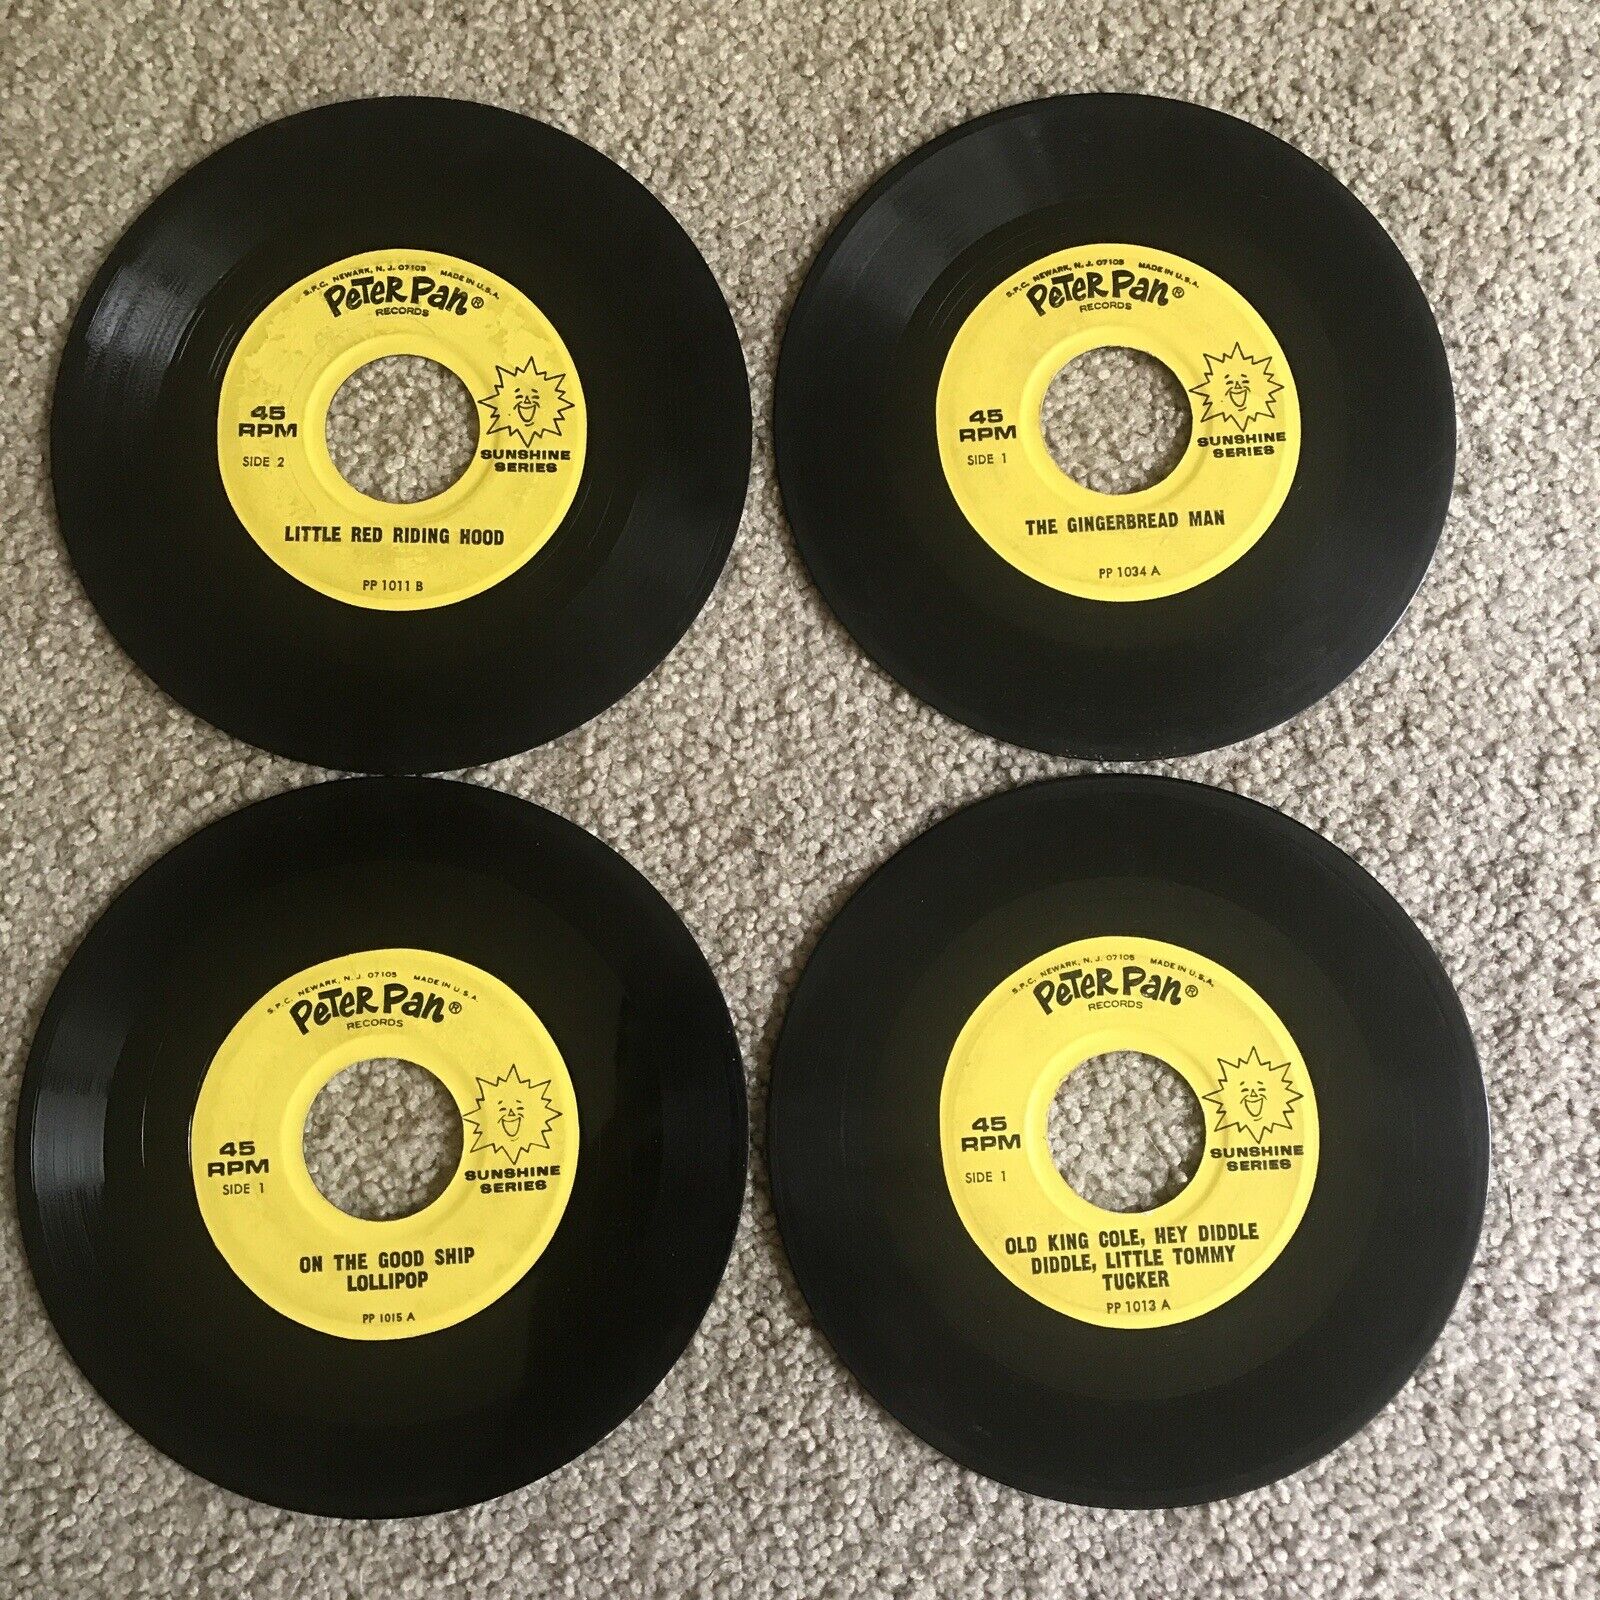 Vintage Lot (4) Peter Pan Records - Children Records, 45 RPM - Little Red Riding